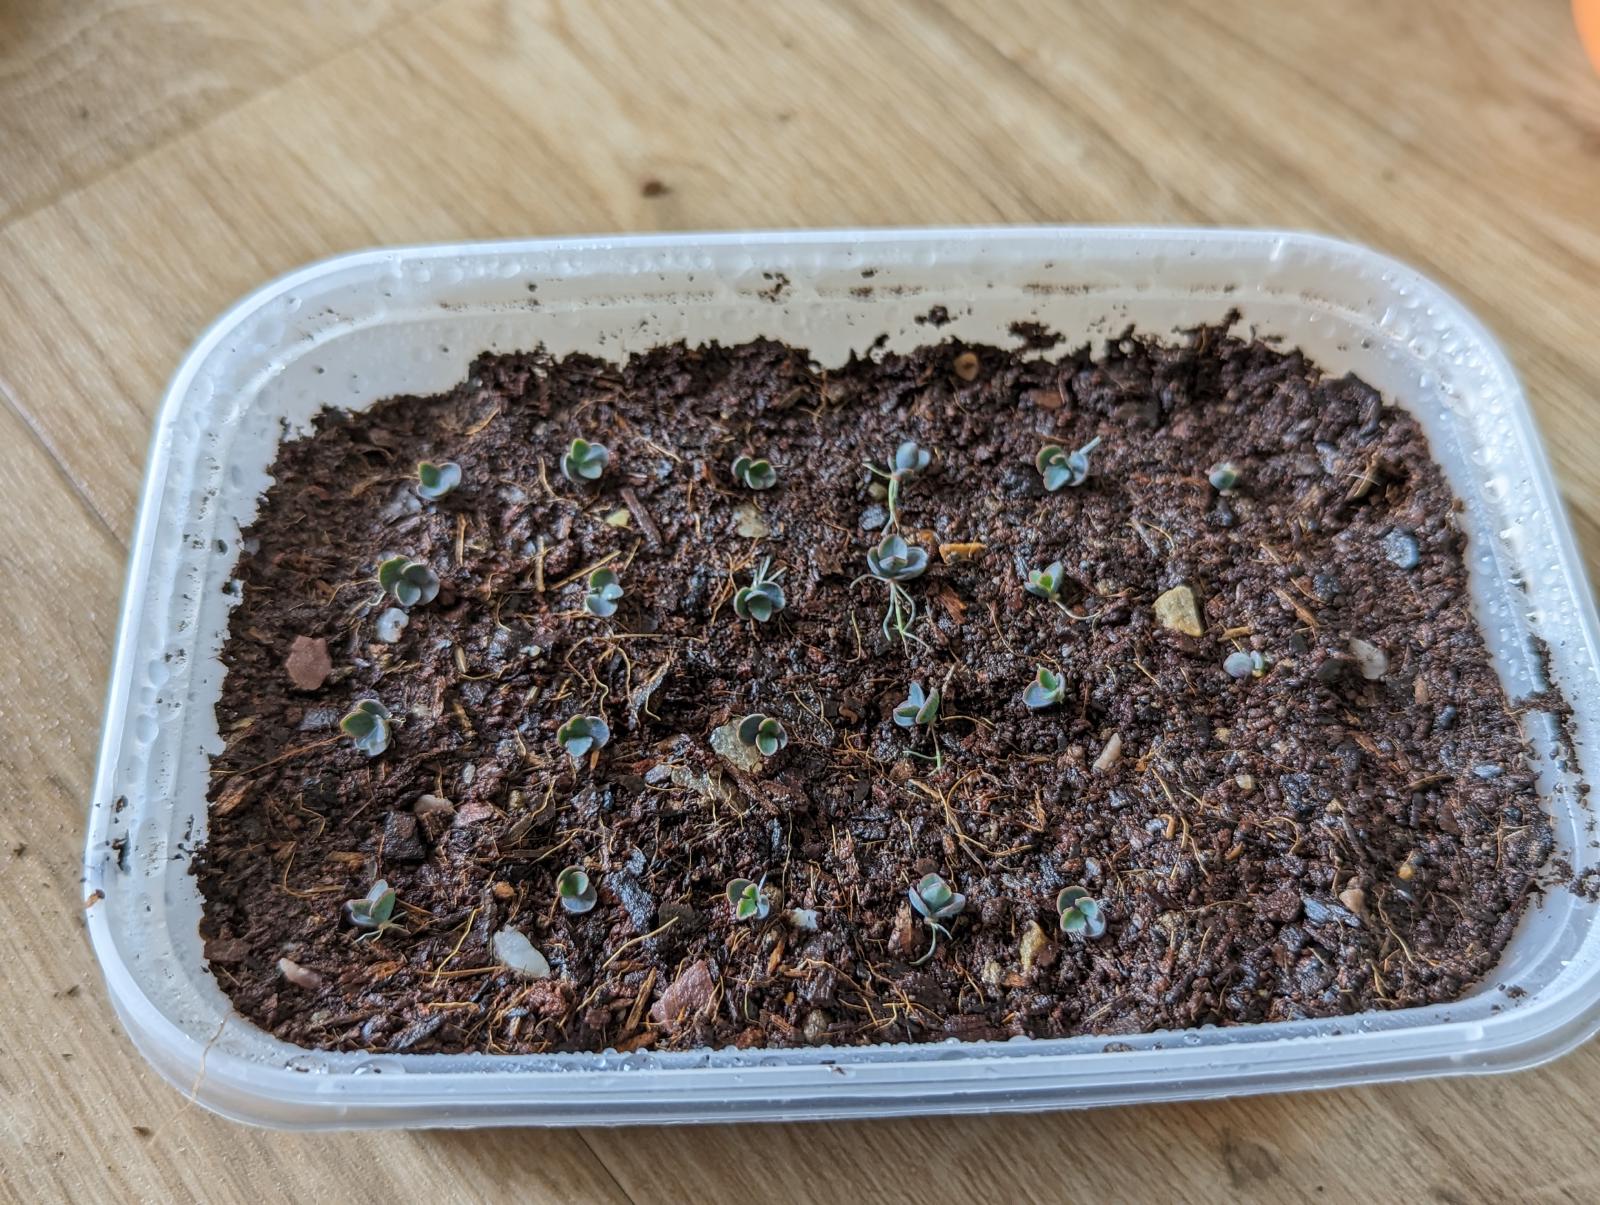 Tray of potting mix with plantlets spaced roughly 1cm apart from each other. The plantlets are very small and hard to see among the potting mix.